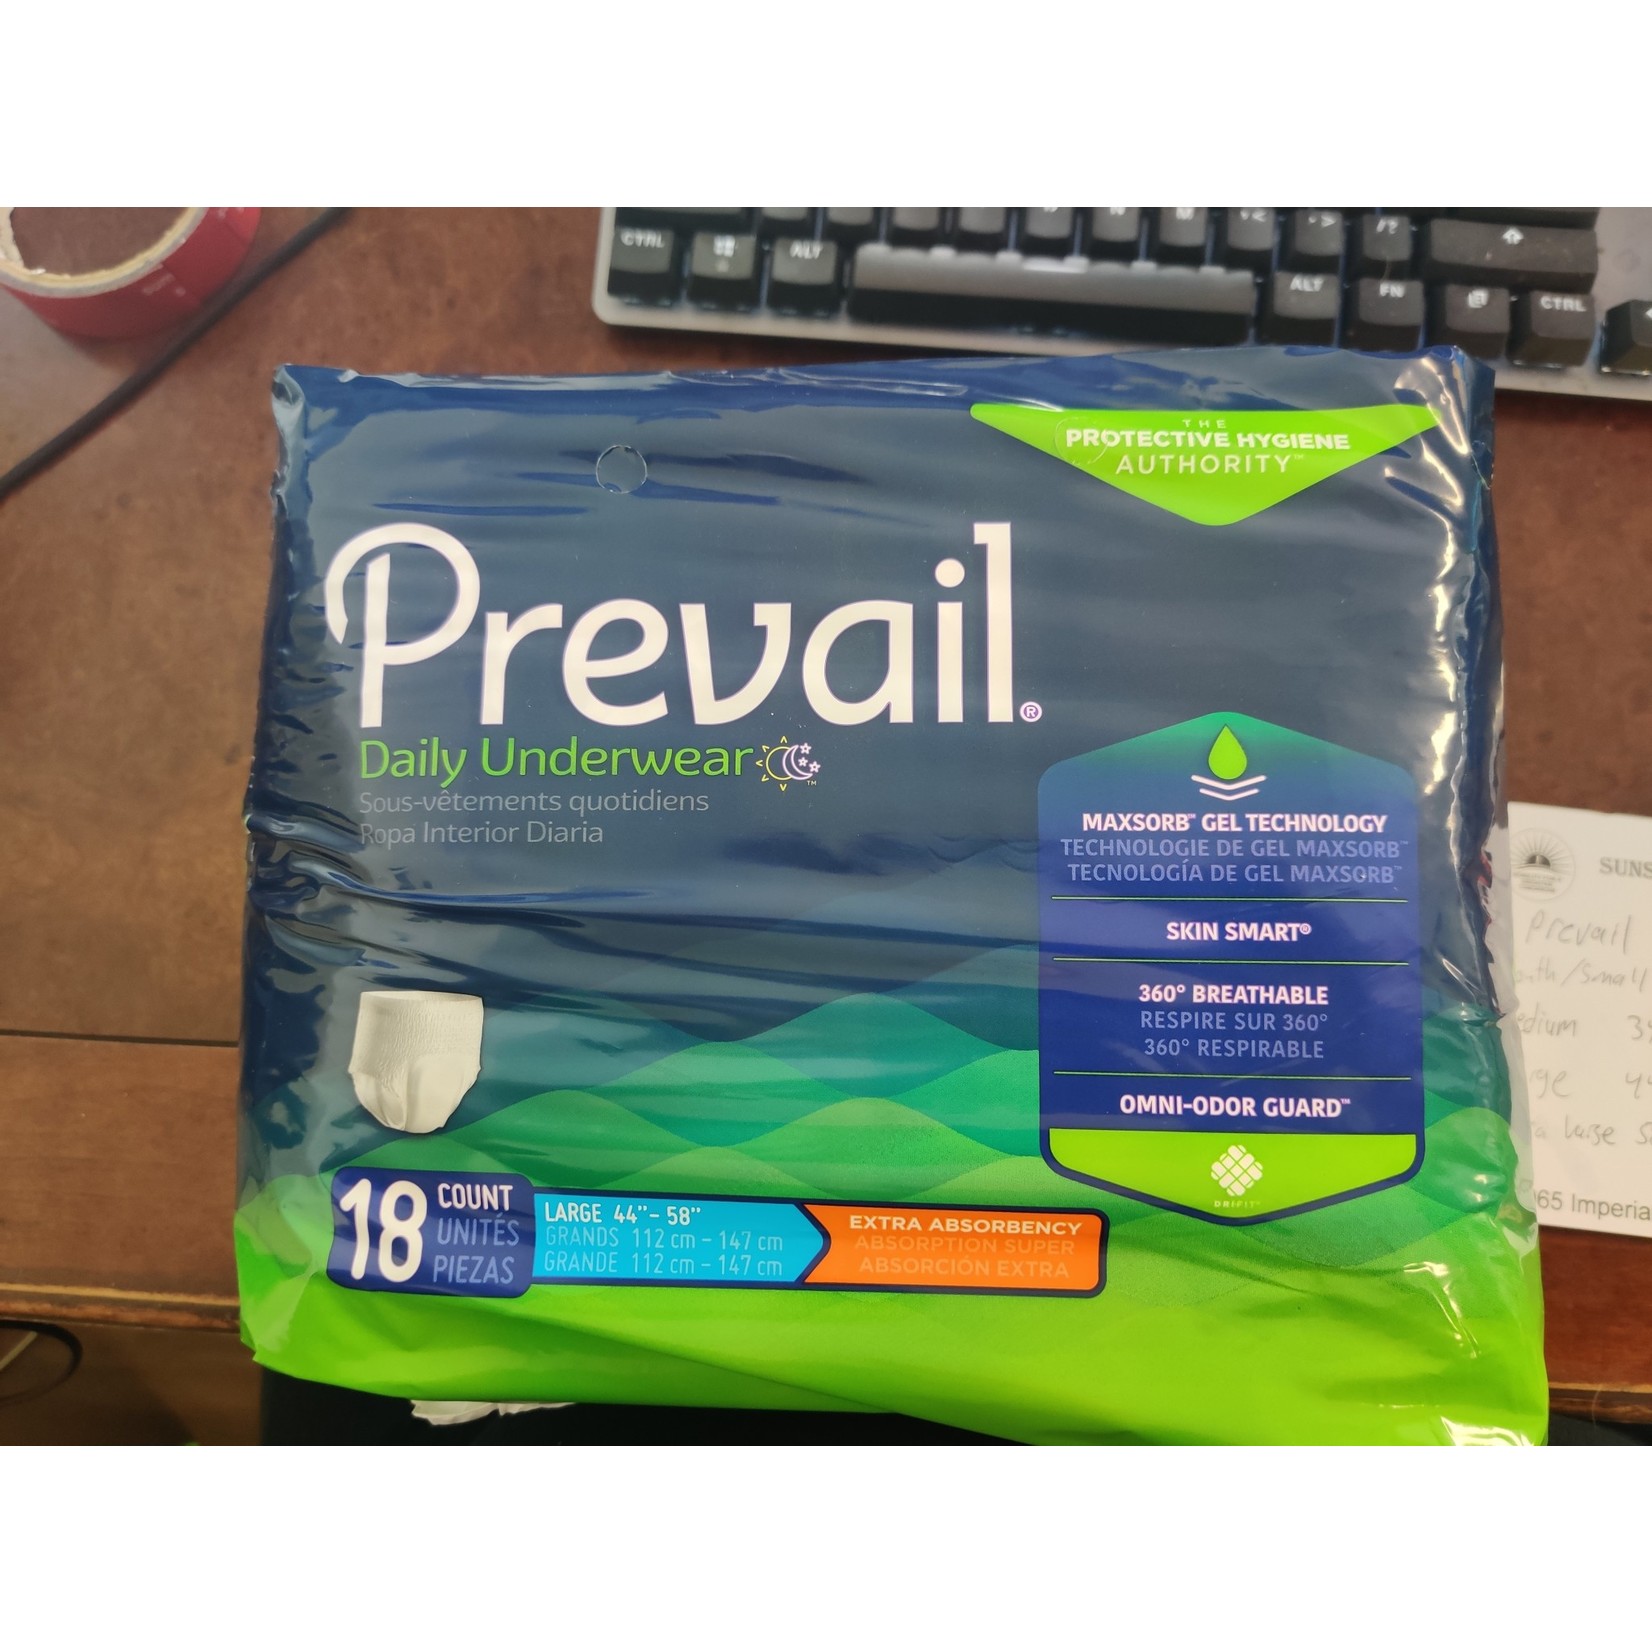 Prevail Pull-On Protective Underwear for Woman